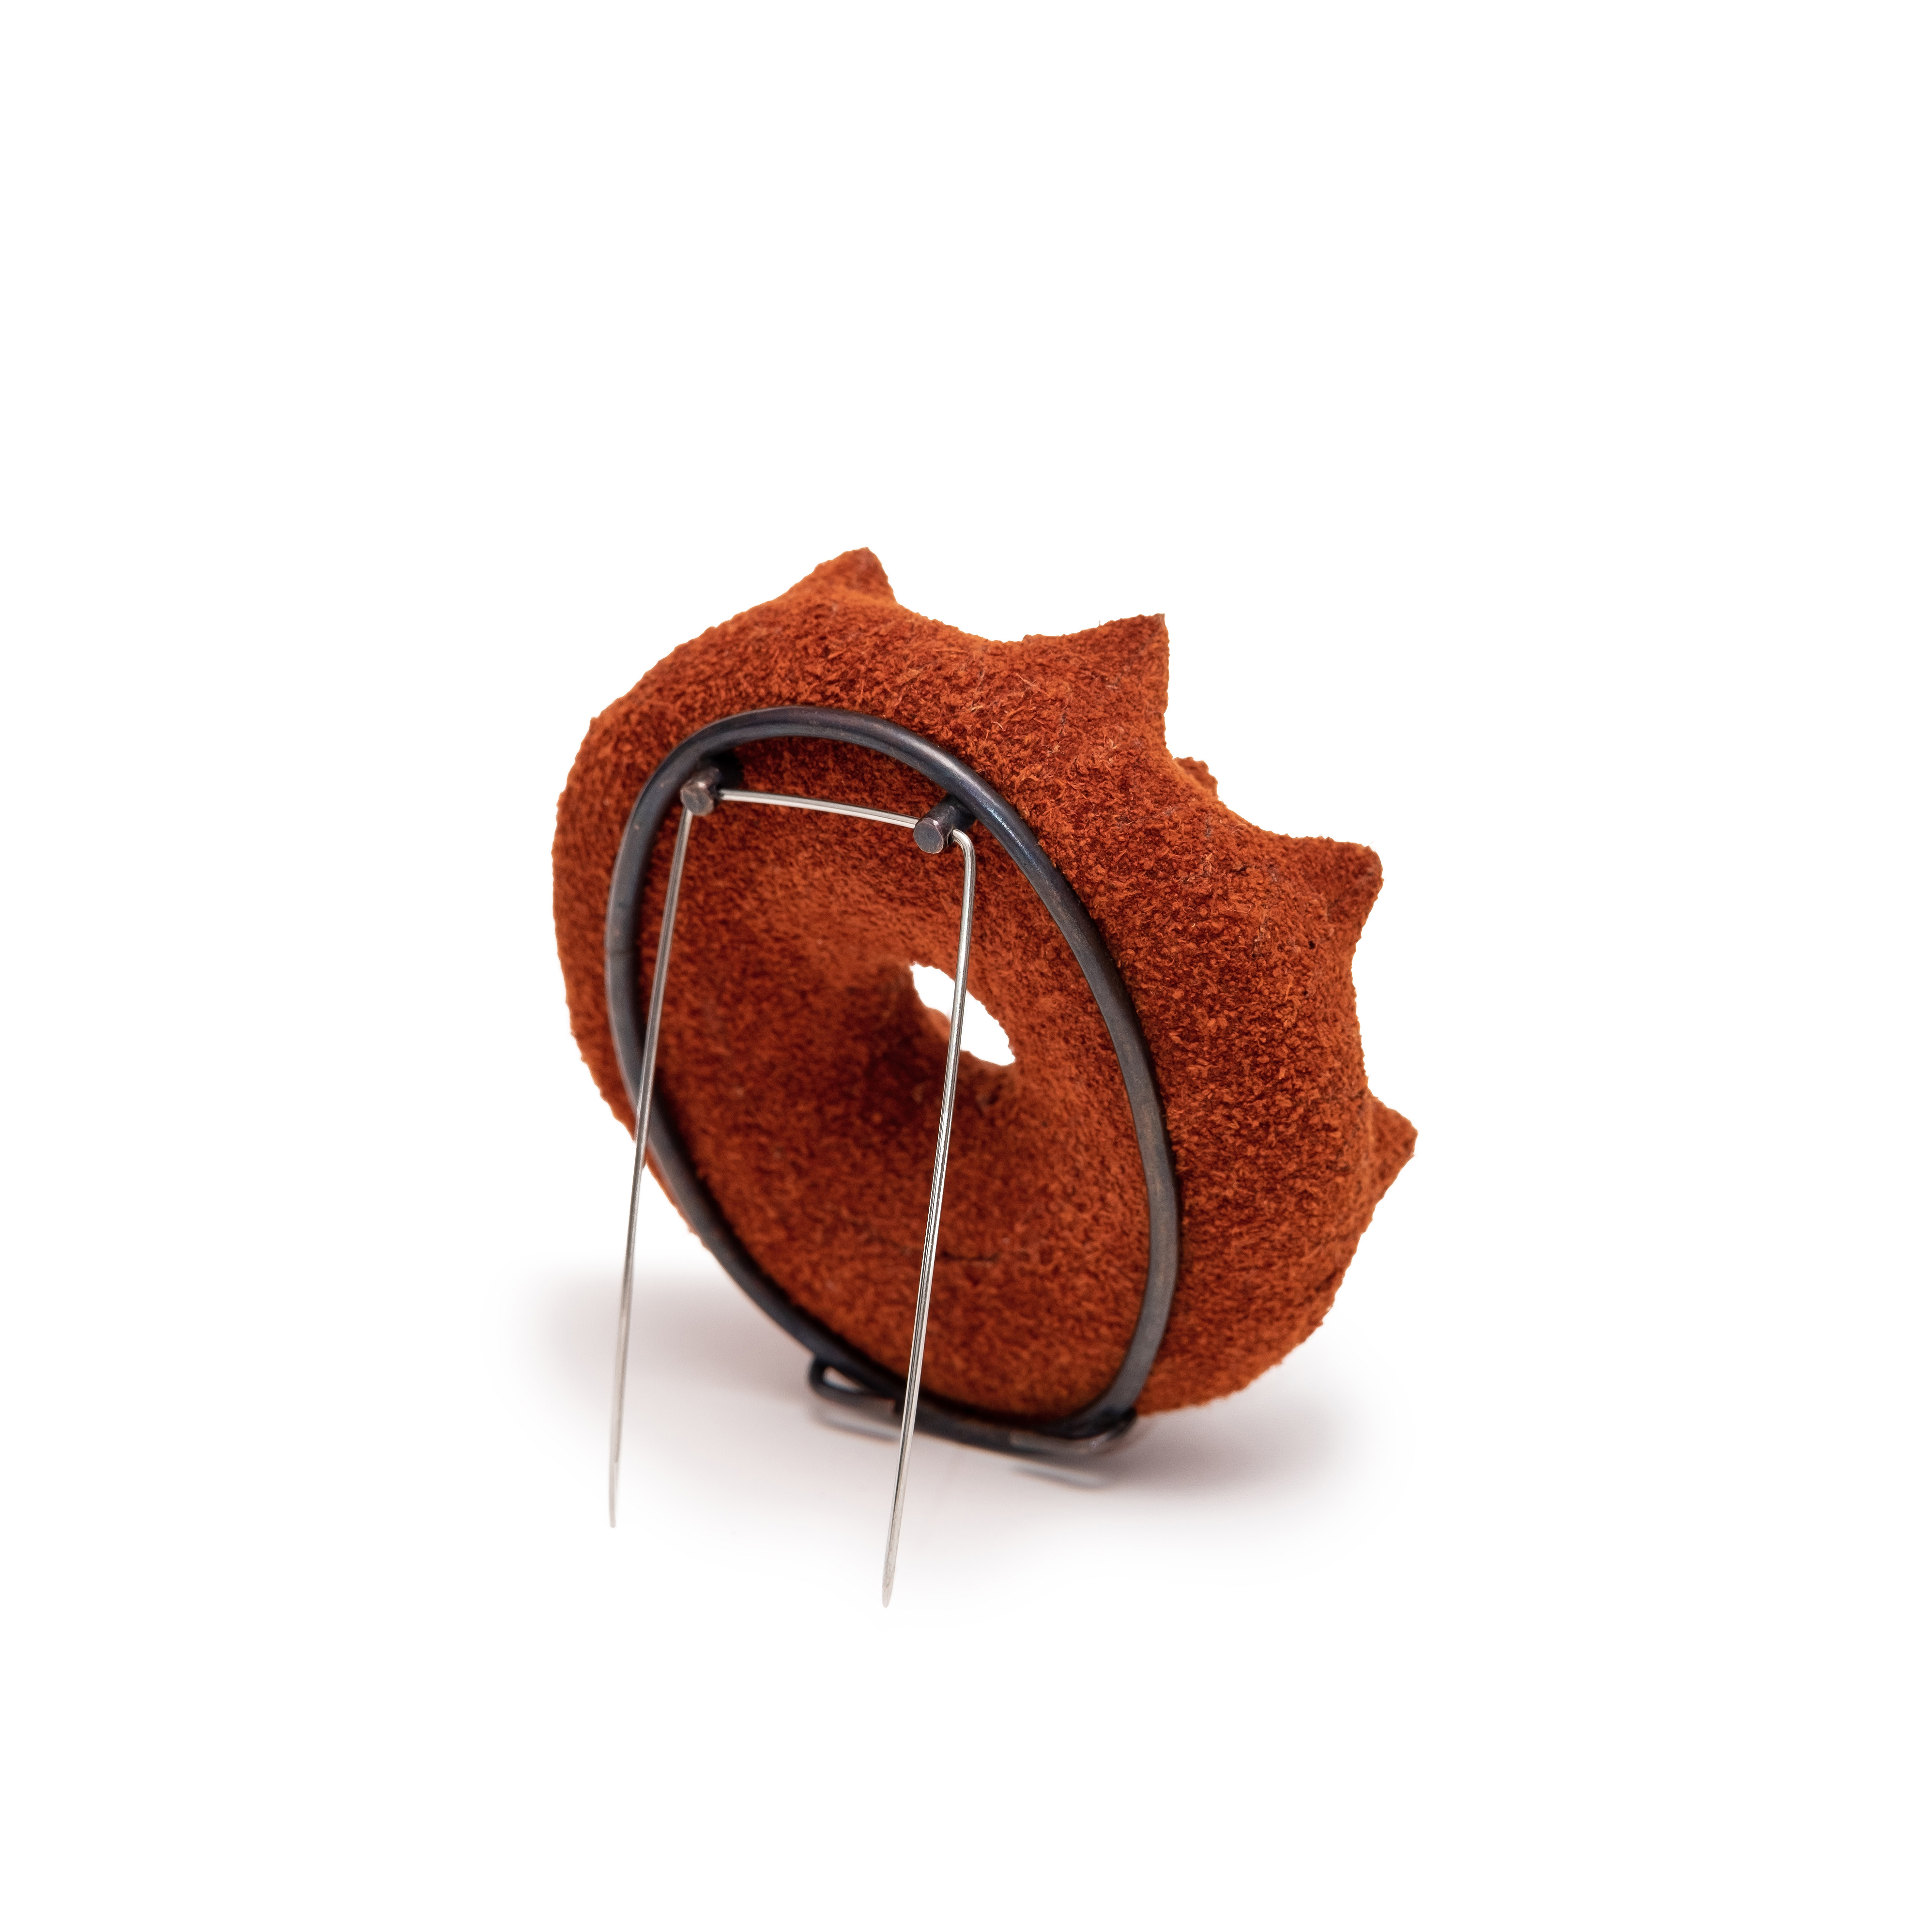 Superorder leather brooch